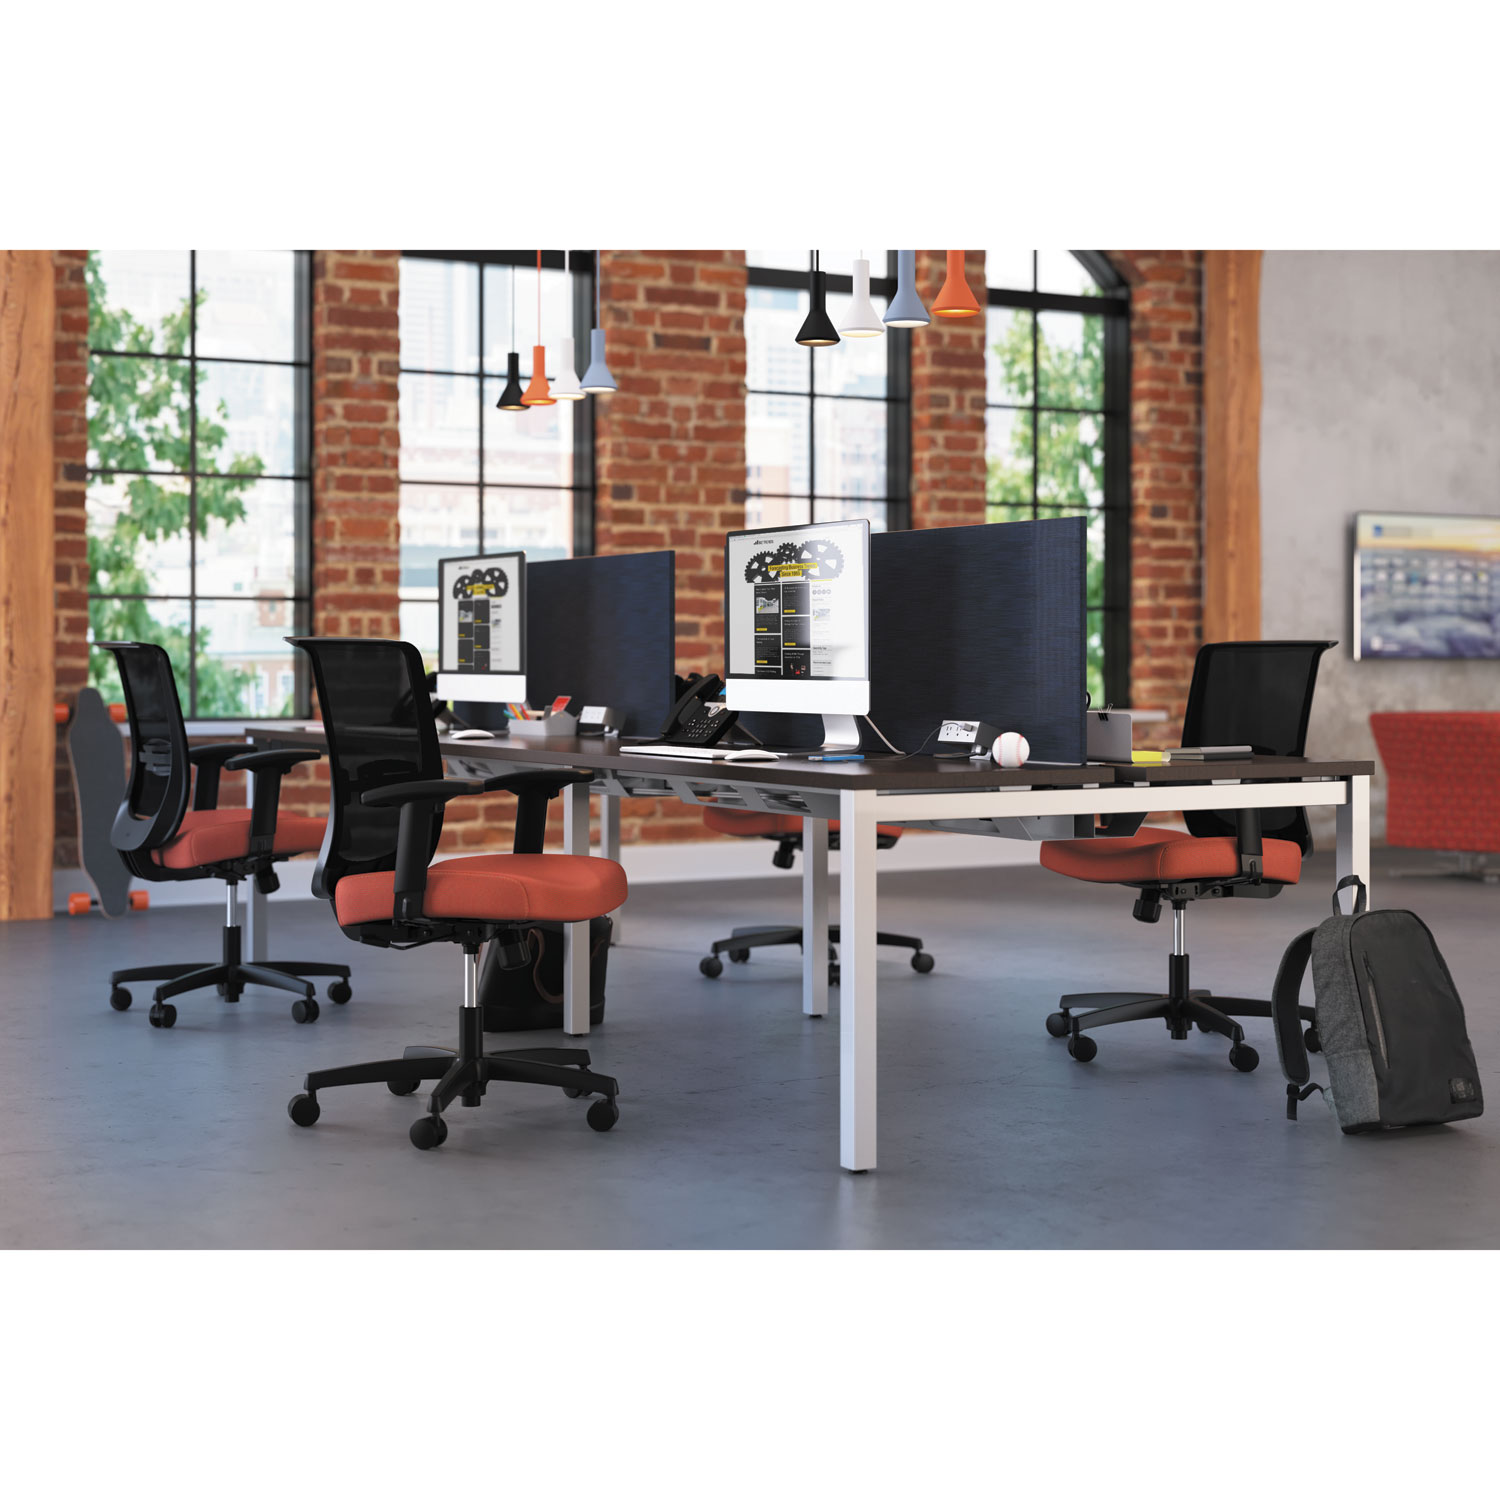 Convergence Mid-Back Task Chair with Syncho-Tilt Control with Seat Slide, Supports up to 275 lbs., Red Seat, Black Back/Base